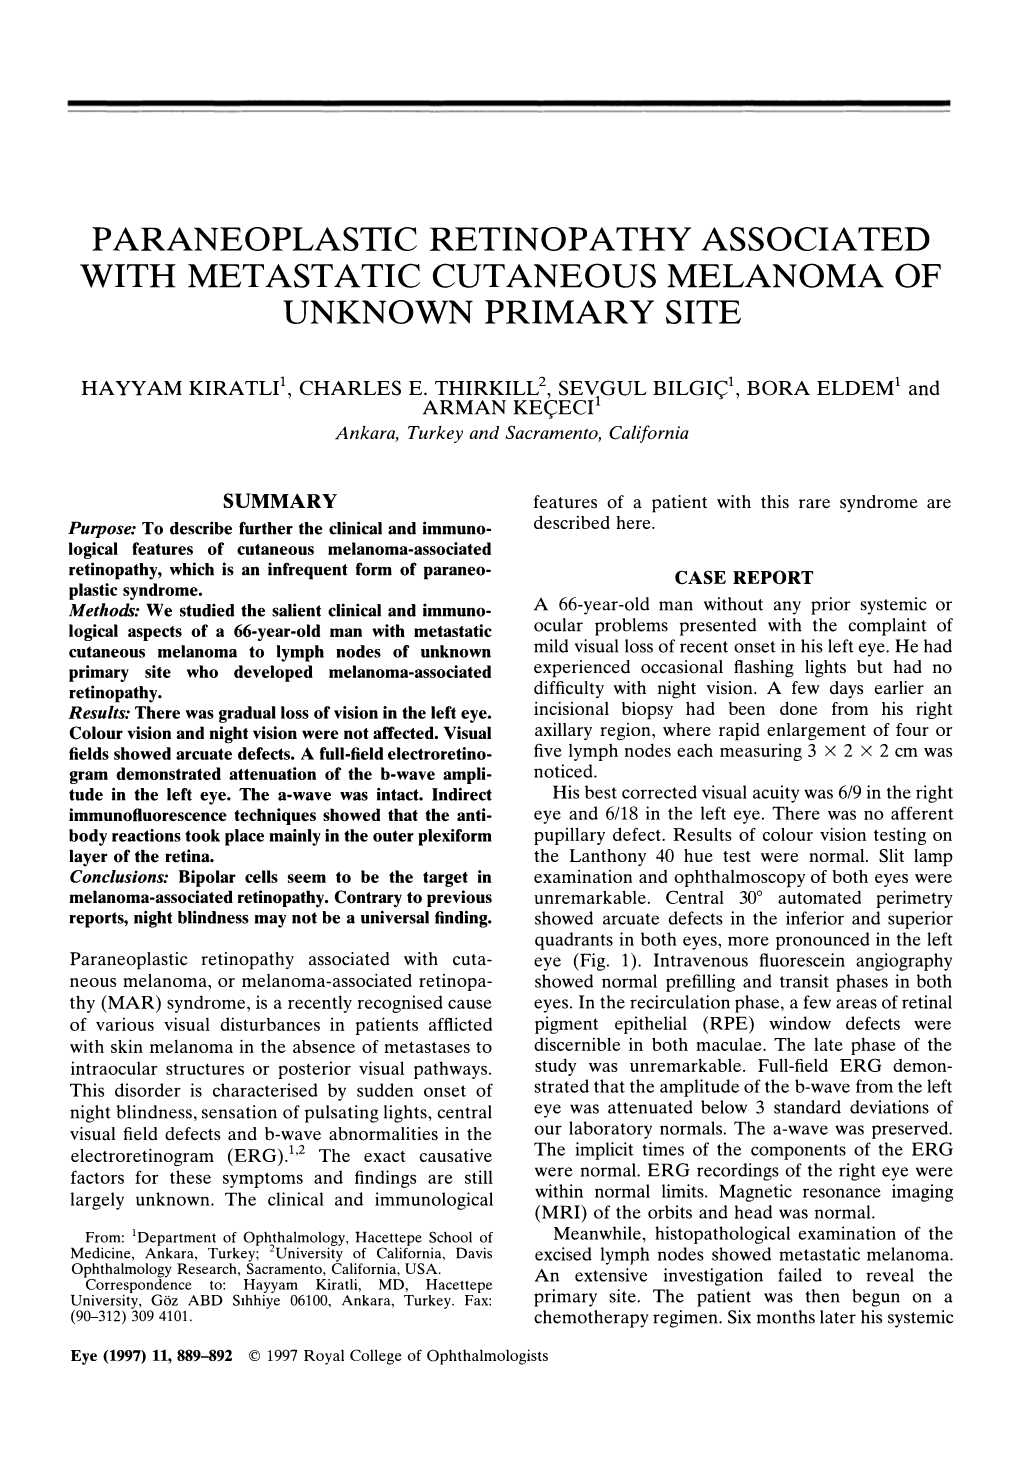 Paraneoplastic Retinopathy Associated with Metastatic Cutaneous Melanoma of Unknown Primary Site